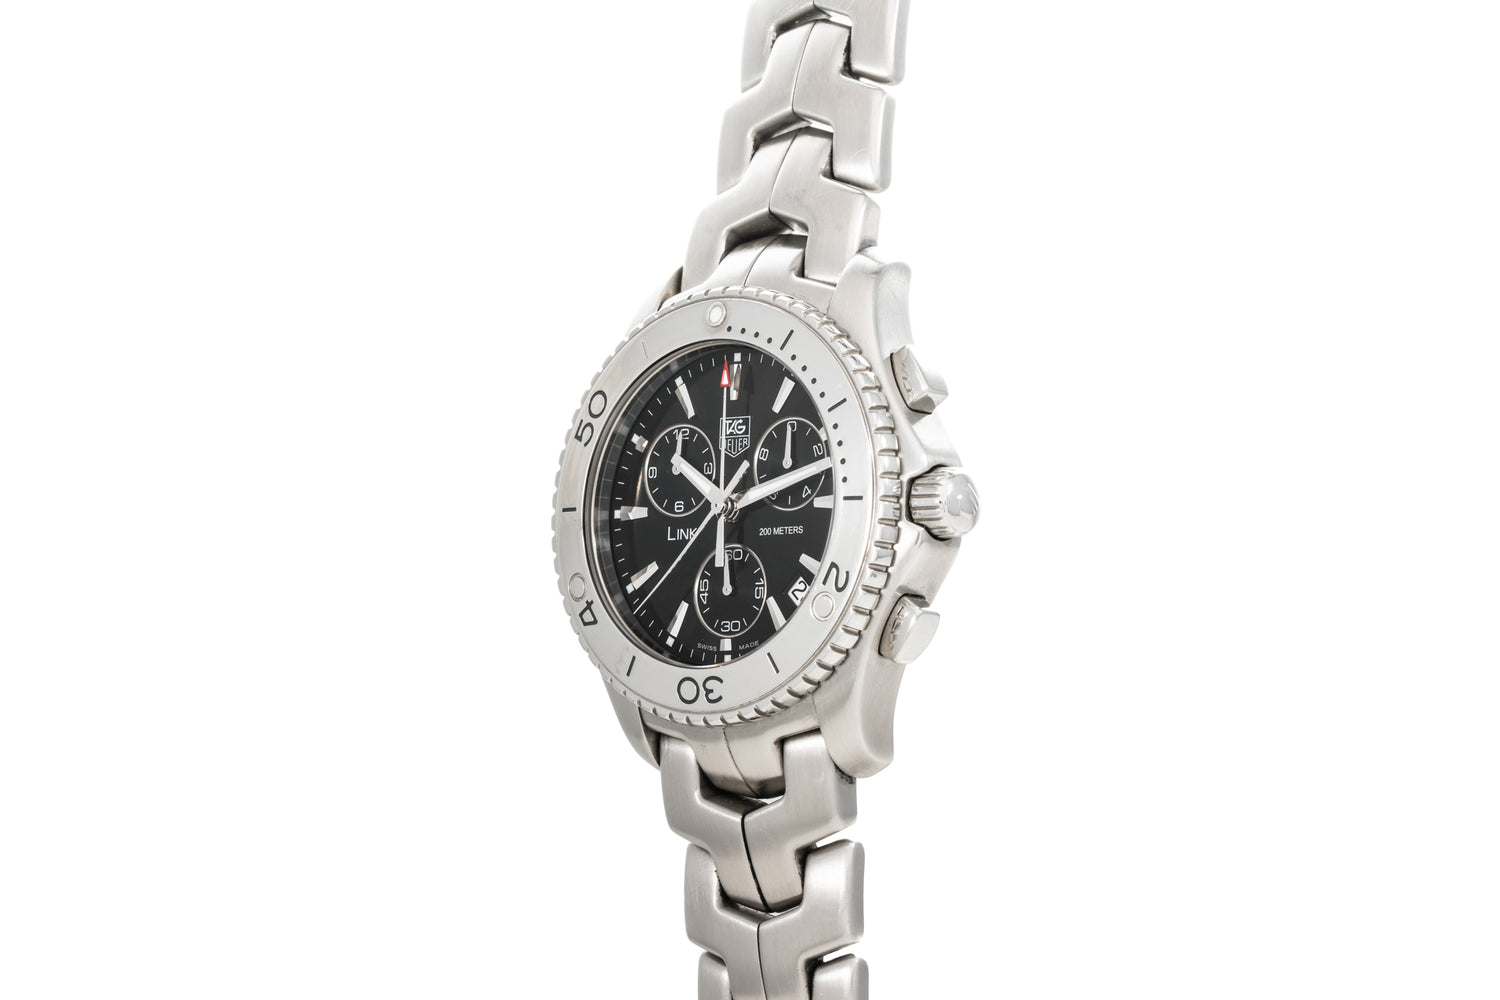 Tag Heuer Men's CT1111.BA0550 'Link' Chronograph Stainless Steel Watch